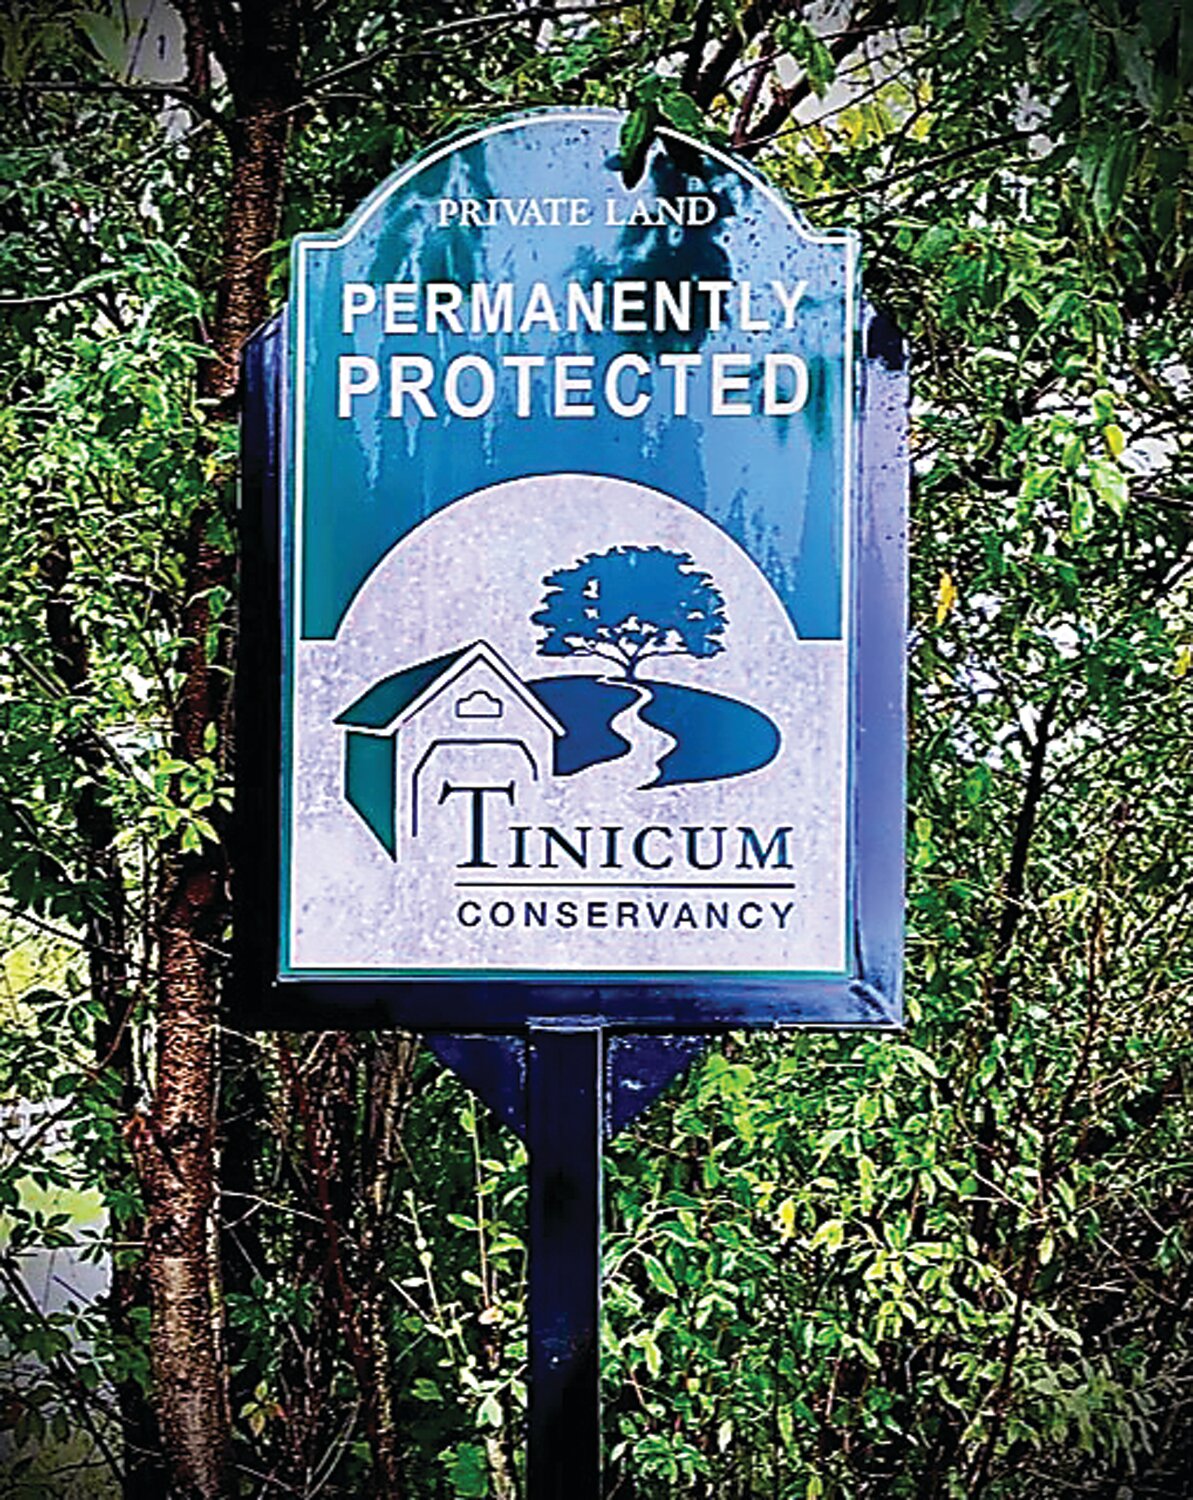 The Tinicum Conservancy has protected more than 5,000 acres in and around the township, including Black Sheep Farm in Pipersville.